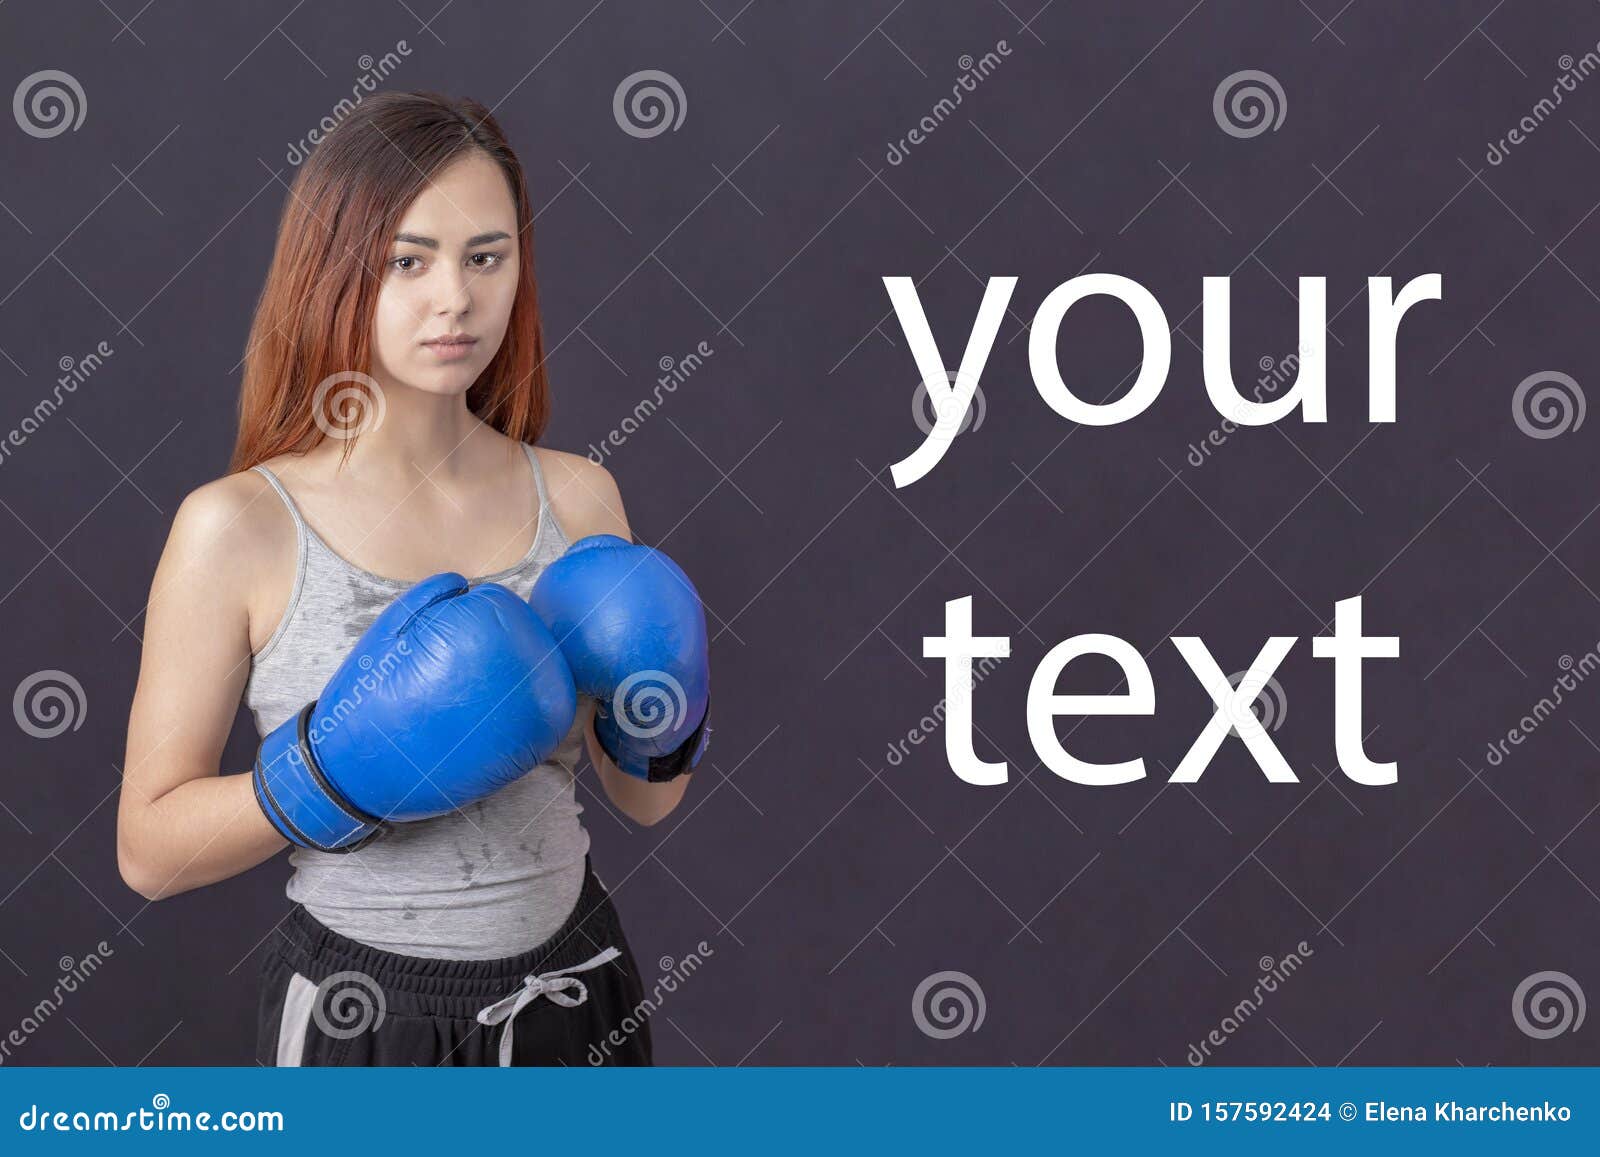 Risk of Injury. Female Boxer Change Attitudes within Sport. Rise of Women  Boxers. Girl Cute Boxer Stock Photo - Image of corner, energy: 157592424